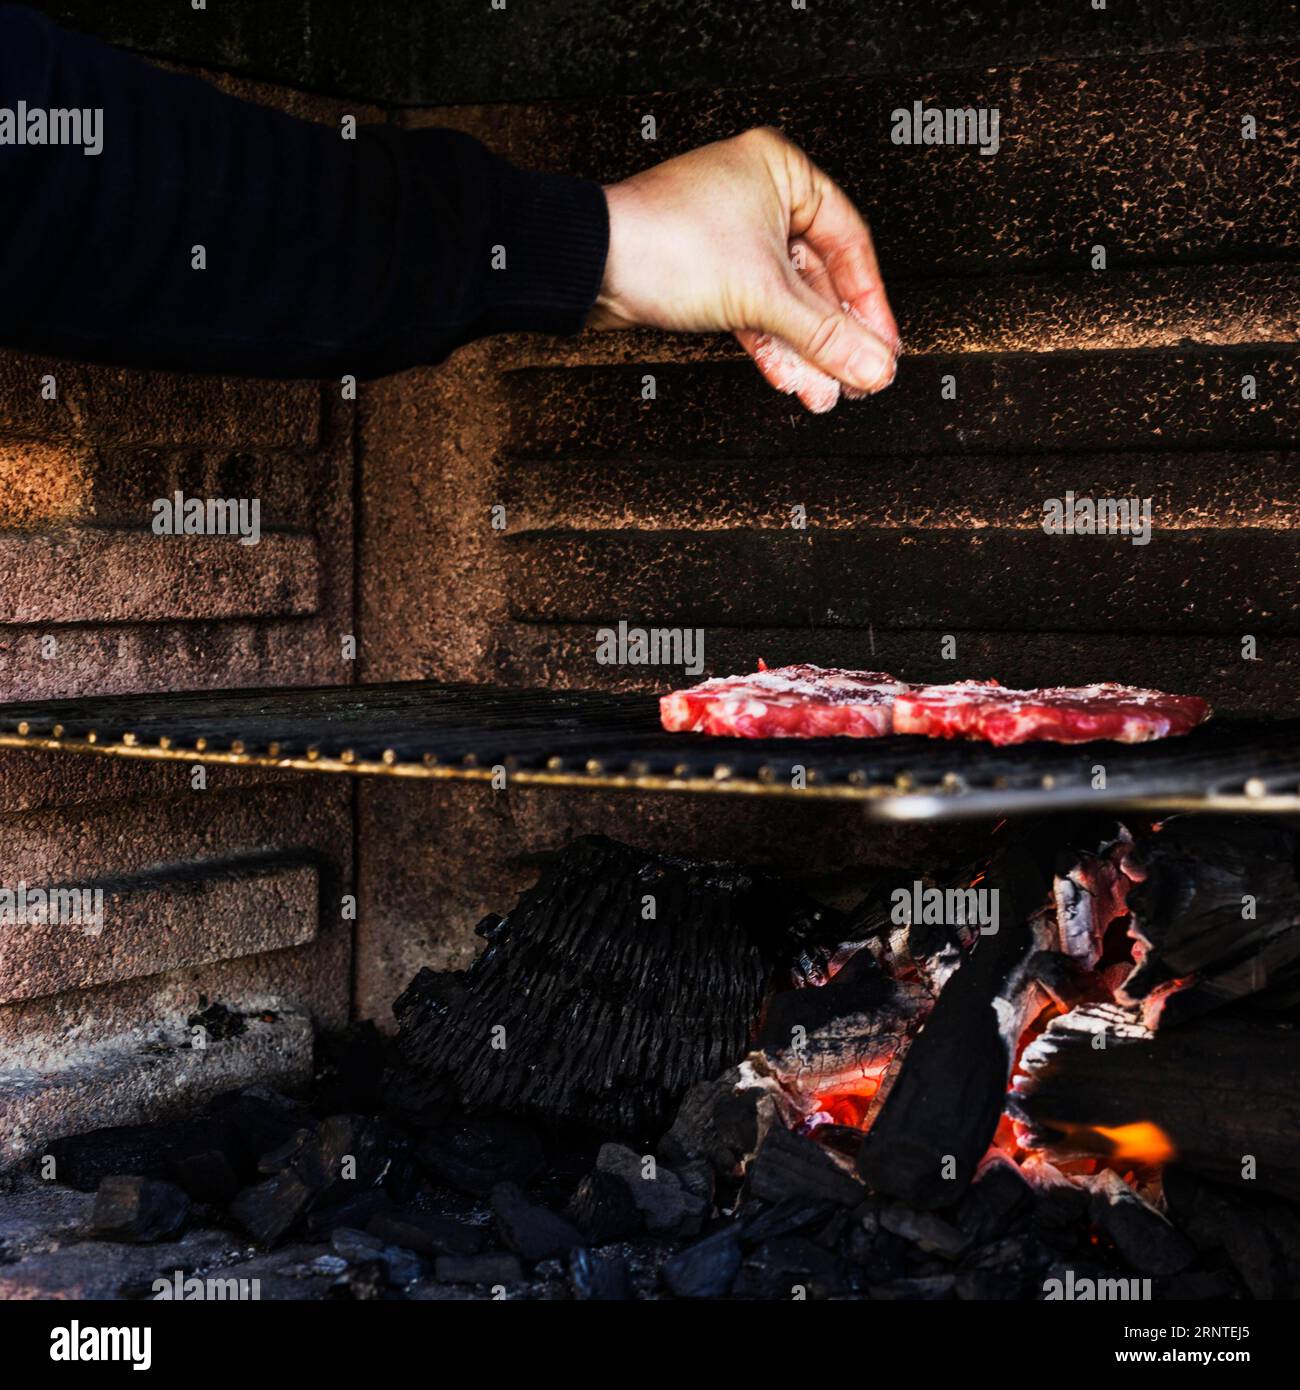 Human hand seasoning meat barbecue grill Stock Photo